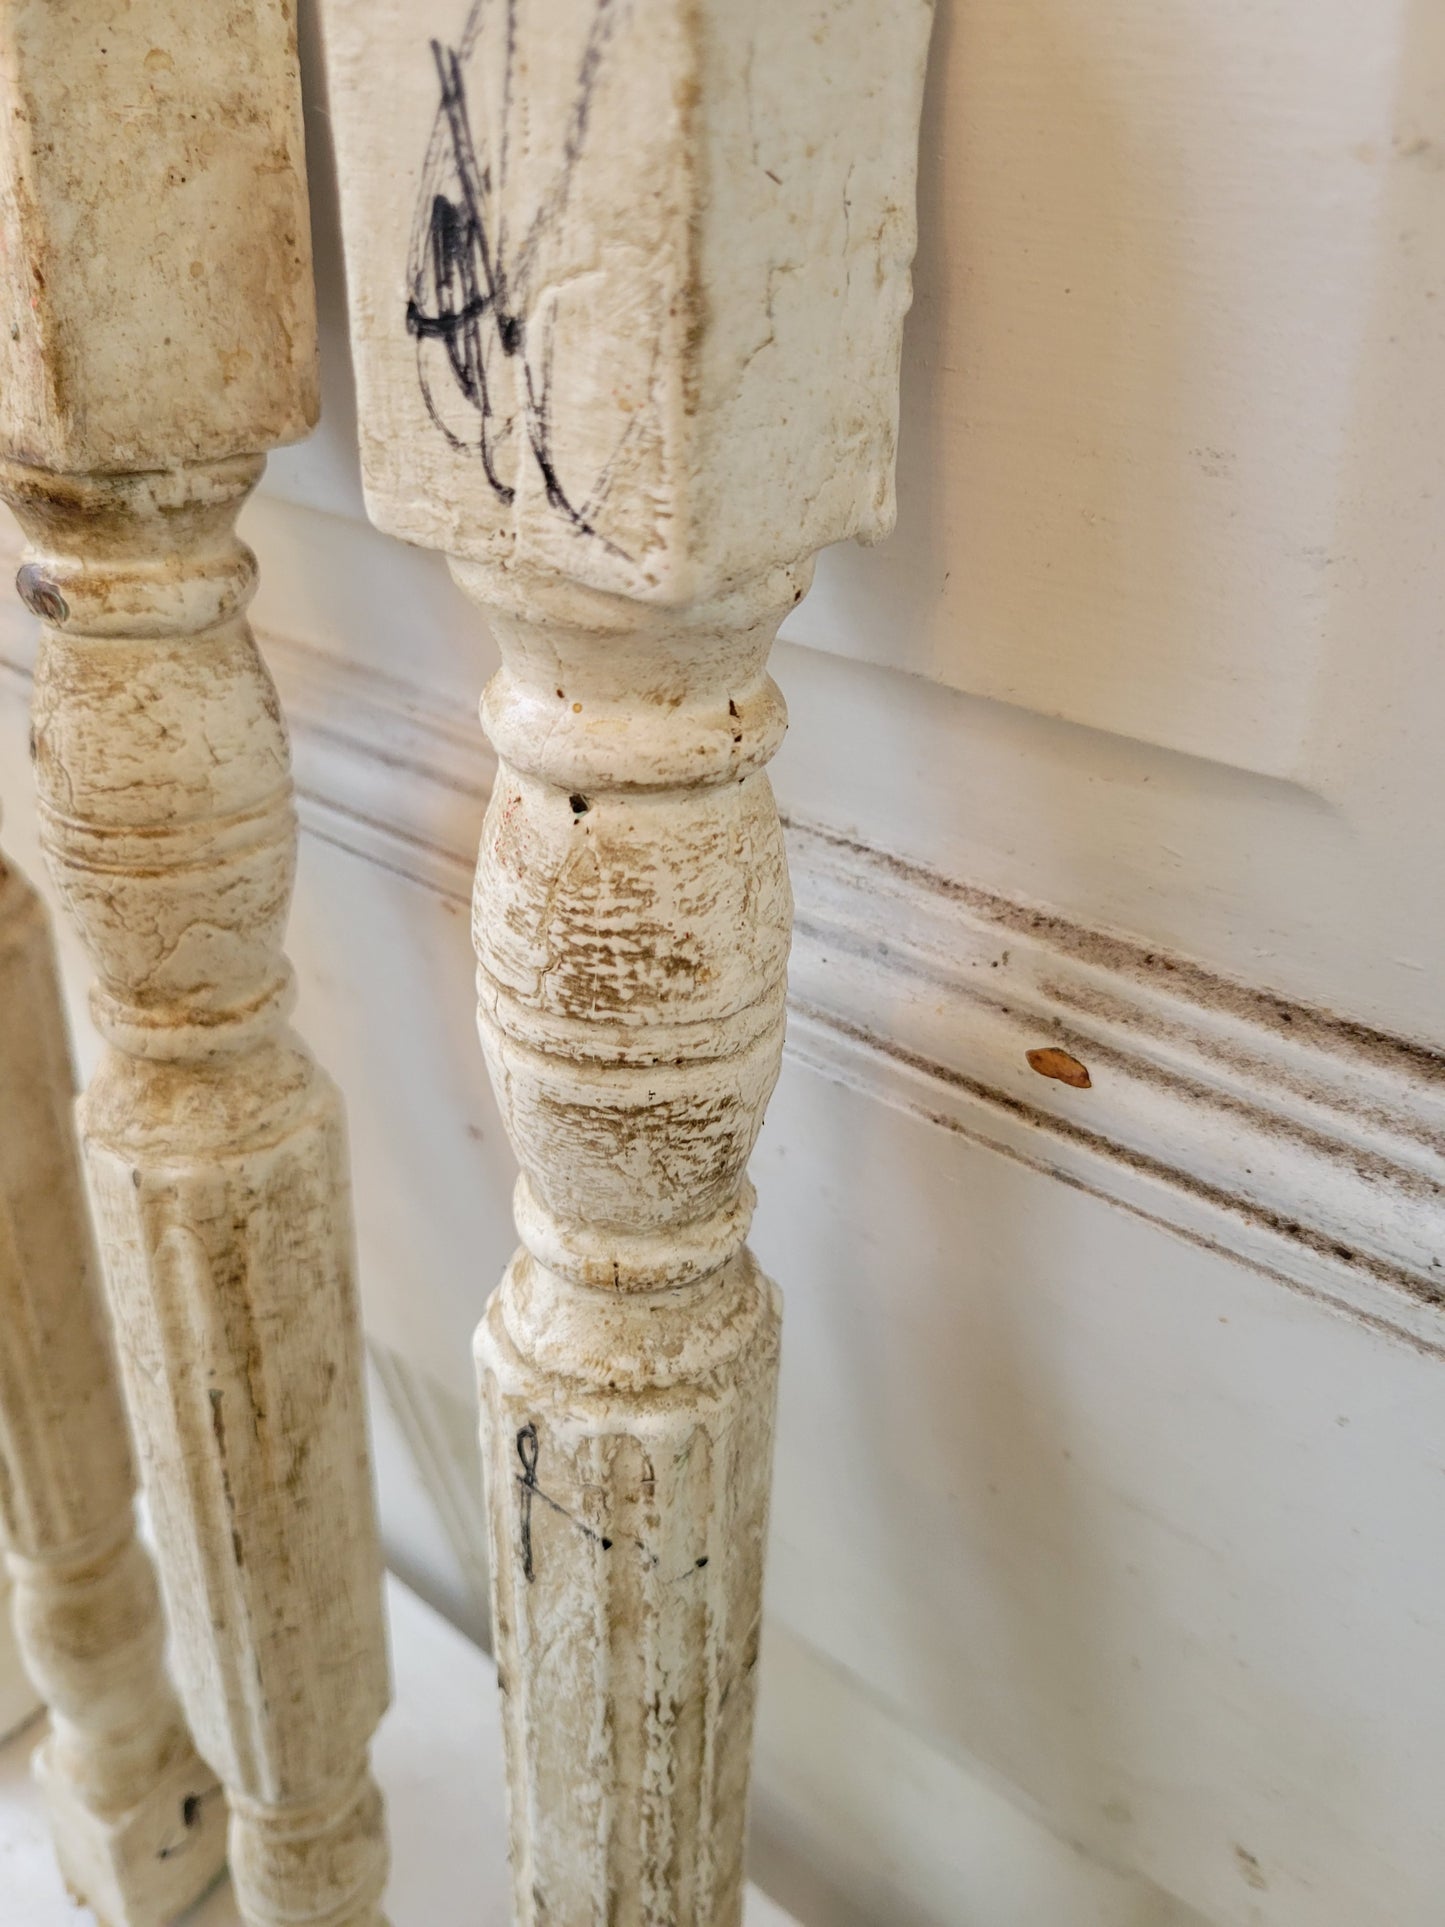 Set of 10 Antique White Spindles, Victorian Staircase Spindles or Balusters